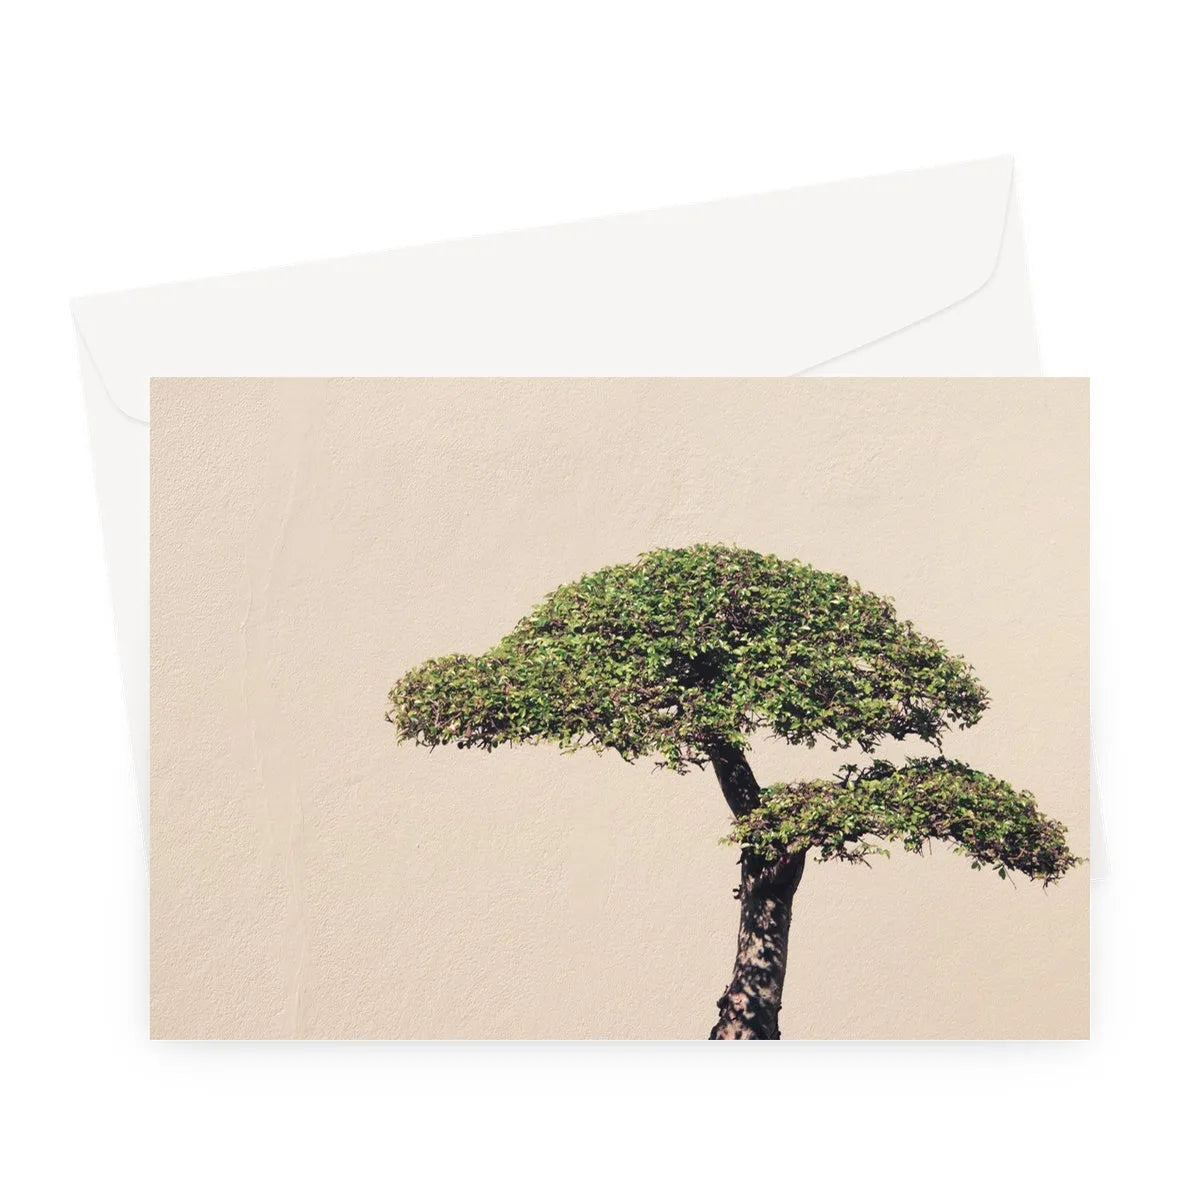 Me Myself And Bonsai Greeting Card - A5 Landscape / 1 Card - Greeting & Note Cards - Aesthetic Art